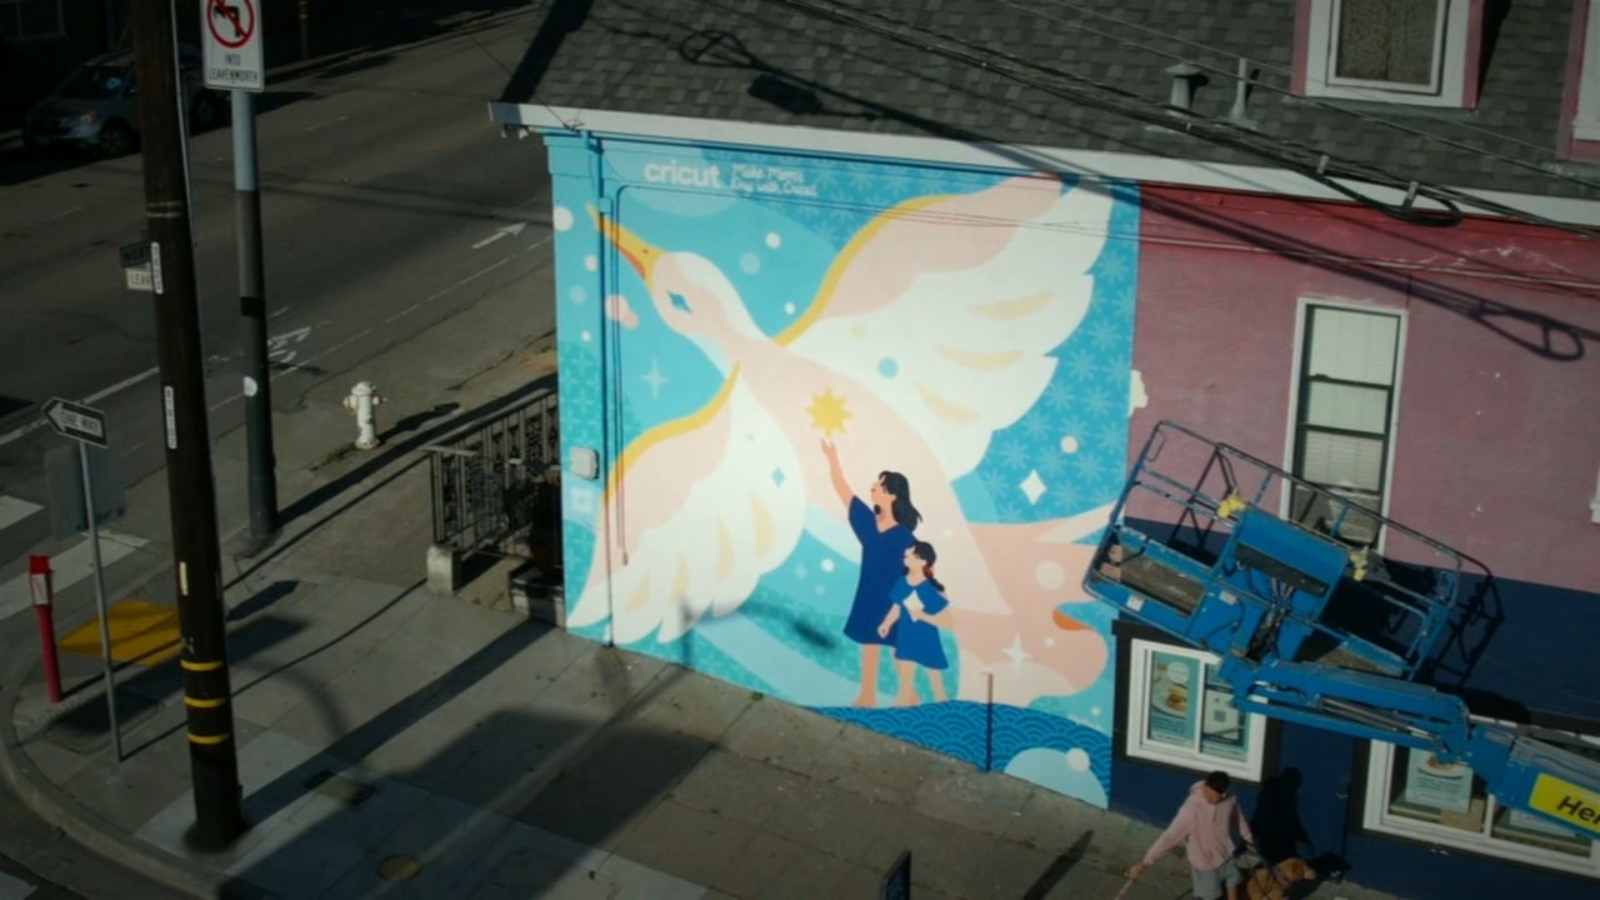 Mother's Day Moms honored through new San Francisco mural made with Cricut tools Patabook News